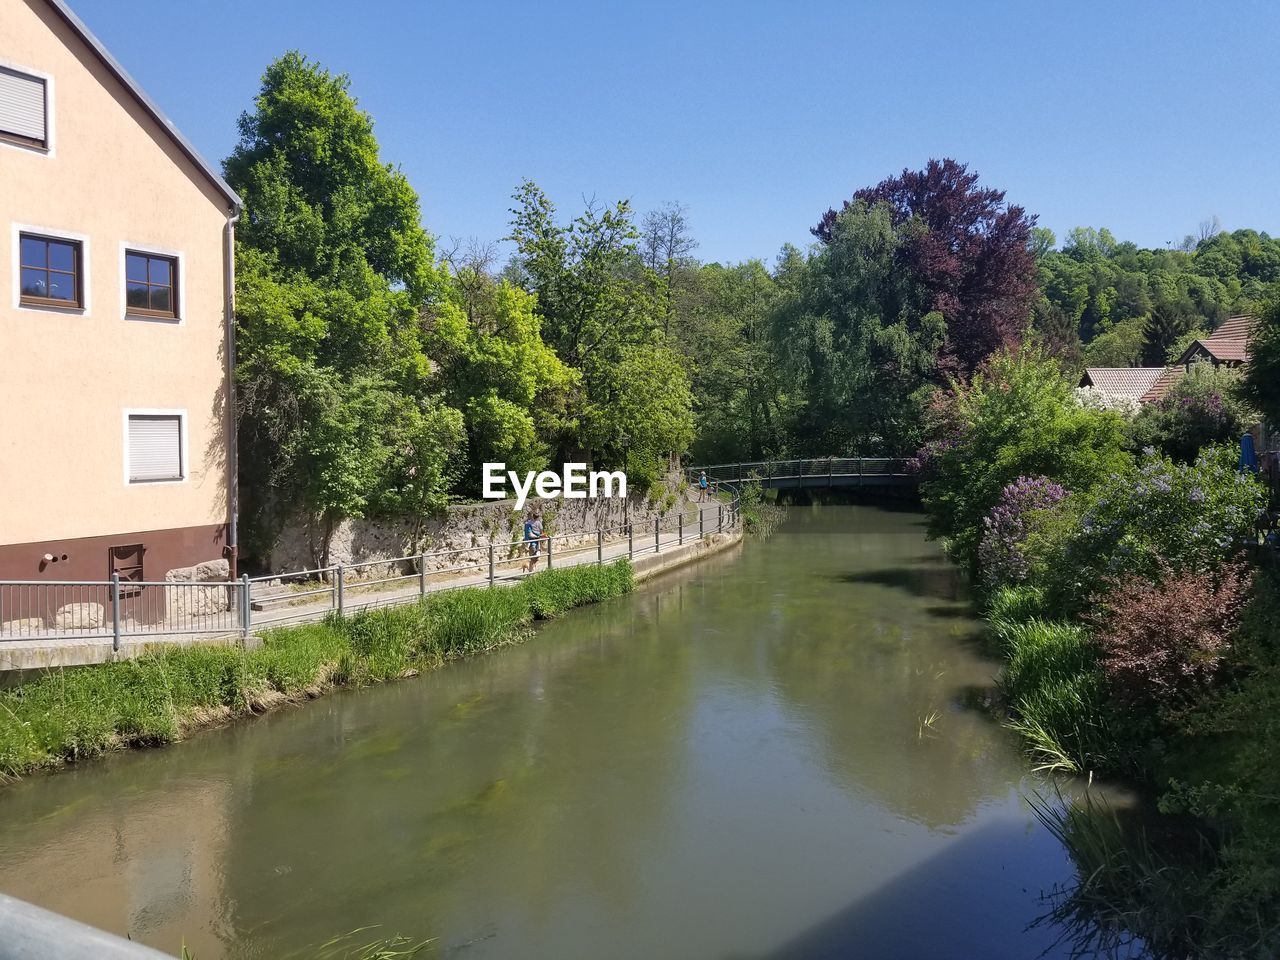 SCENIC VIEW OF RIVER BY TREES AND BUILDINGS AGAINST SKY